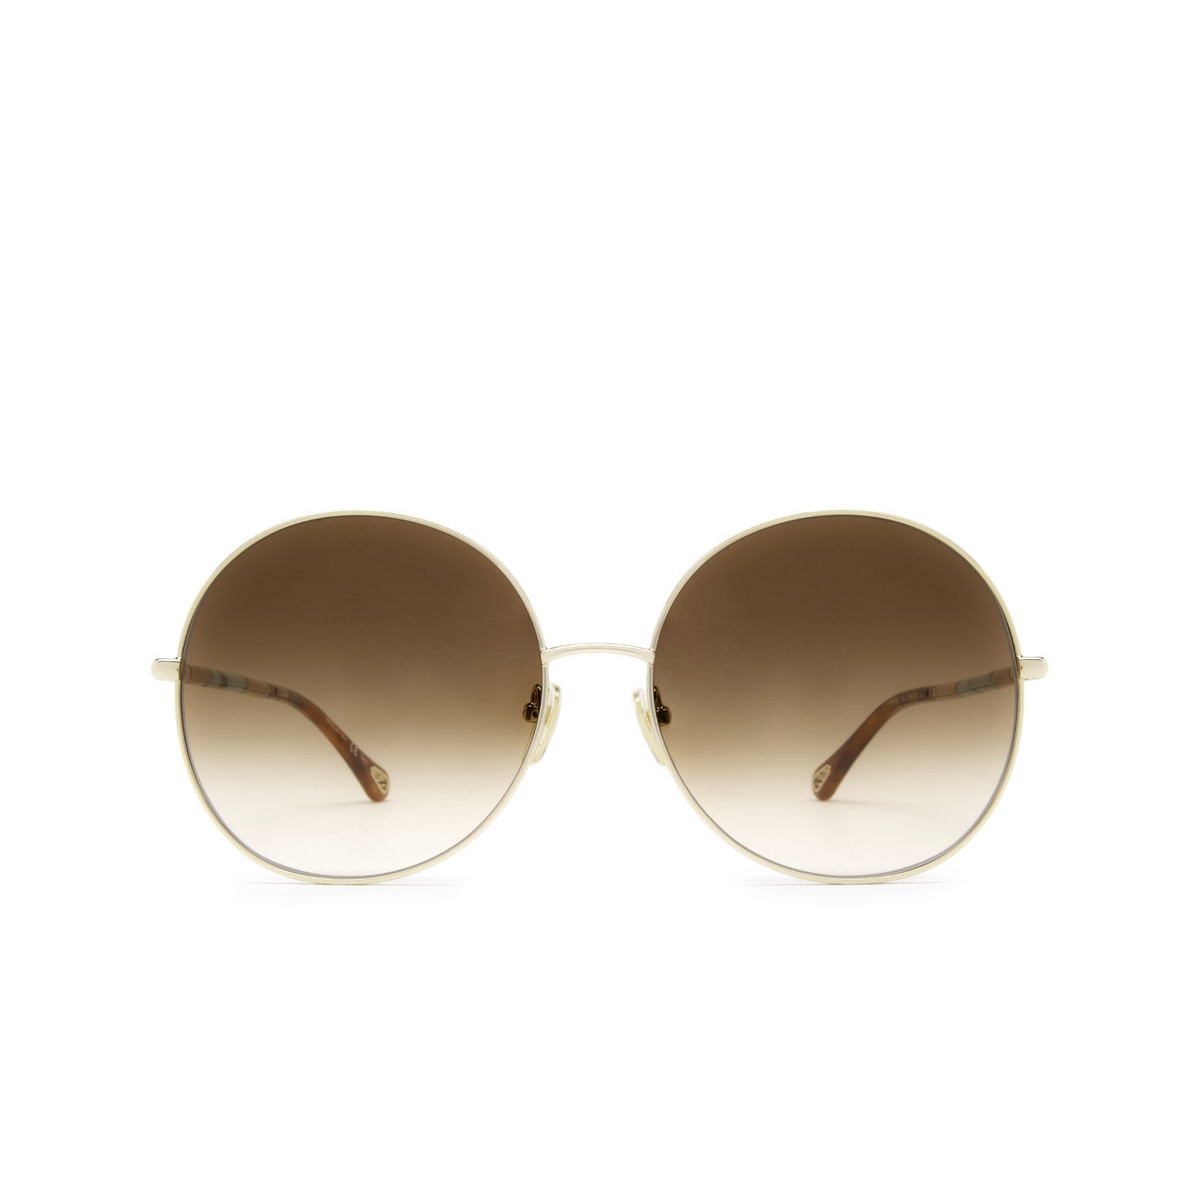 Chloé® Round Sunglasses: CH0112S color Gold 002 - front view.